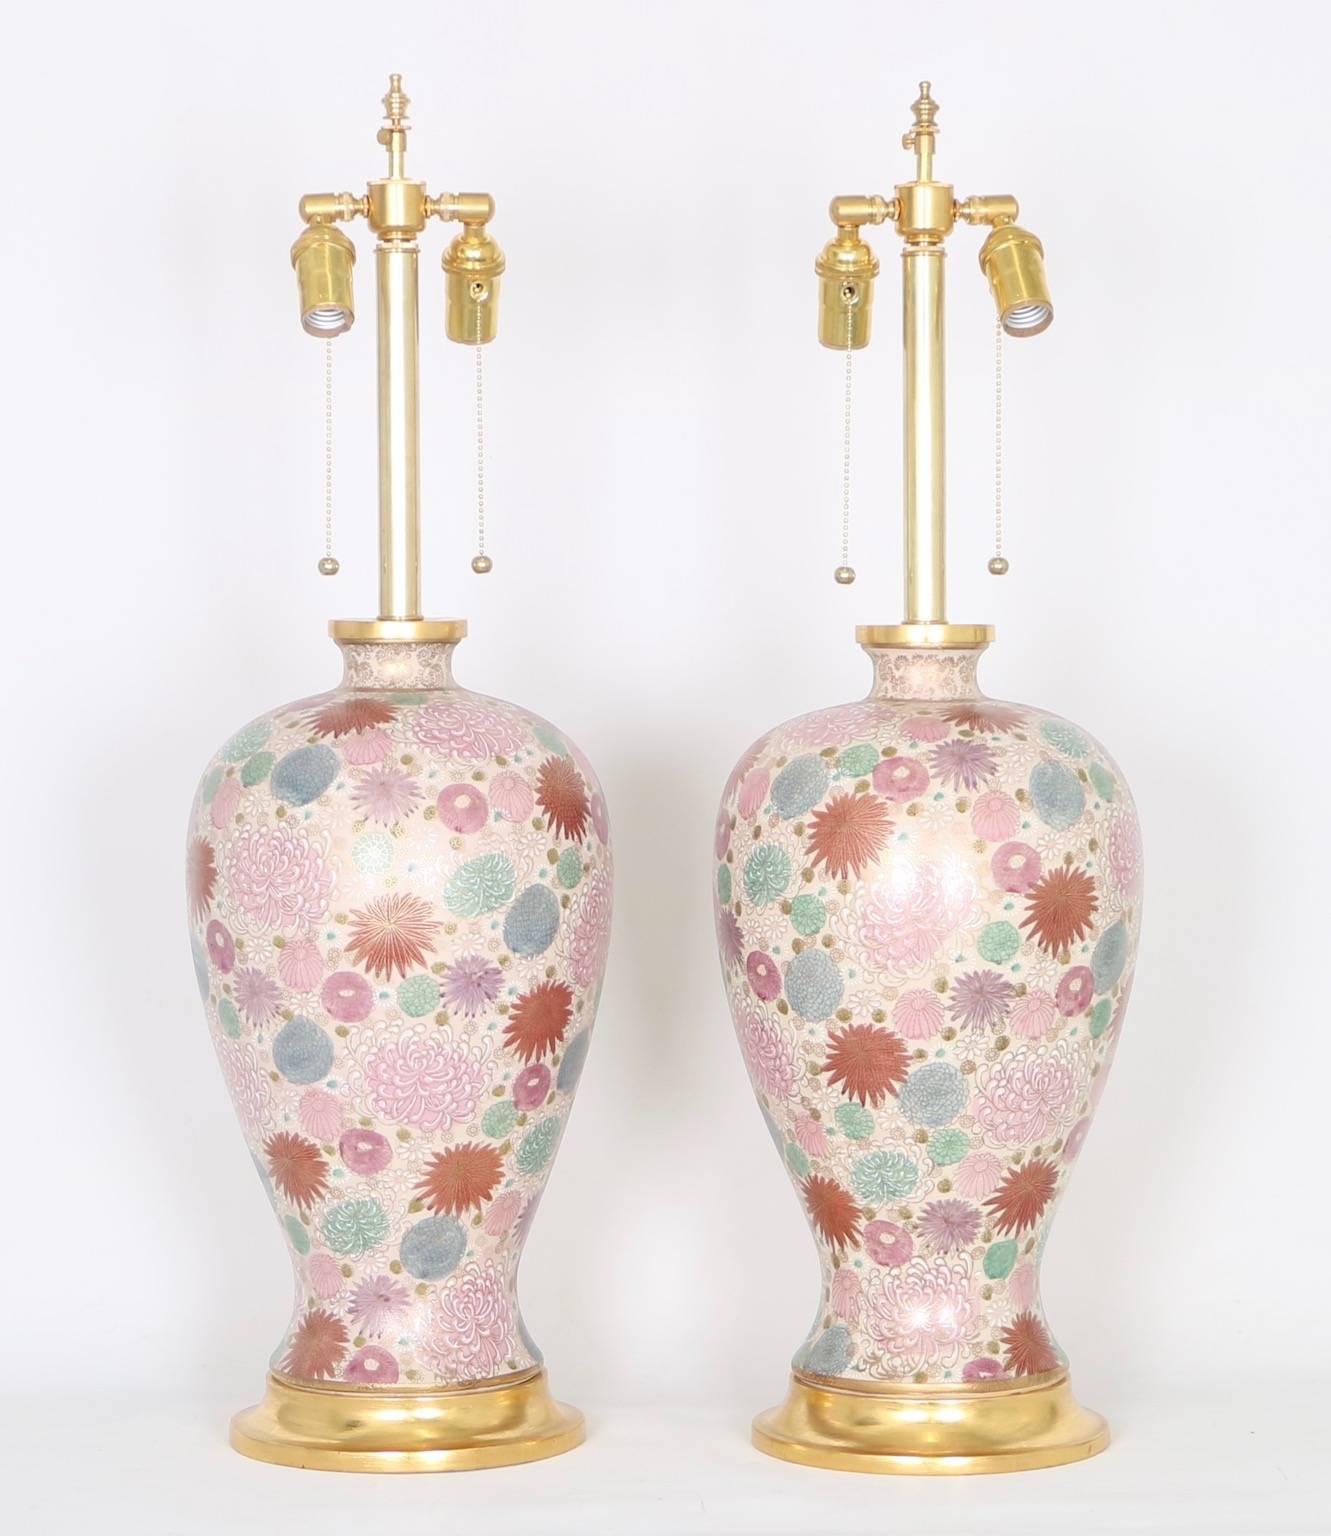 Hollywood Regency Japanese vase table lamps with a chrysanthemum motif in soft pink, mauve, mint, violet and powder blue hues mounted on gilded bases by Mabro. The lamps have been fully restored with all new wiring and hardware including a double